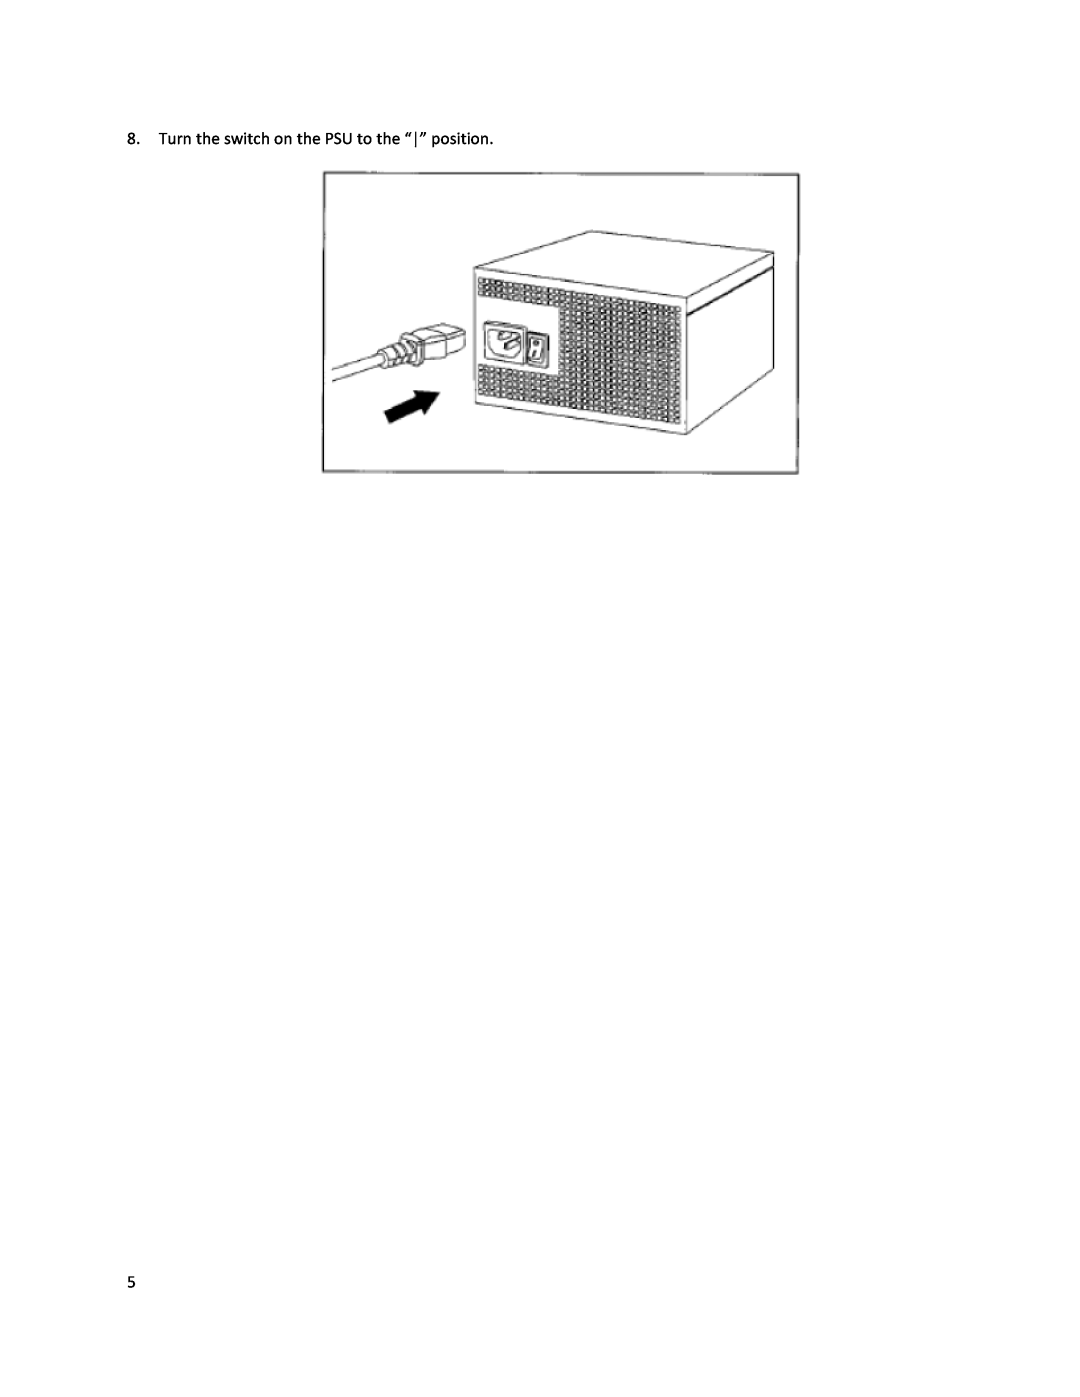 Antec HCG-900 user manual Turn the switch on the PSU to the “” position 